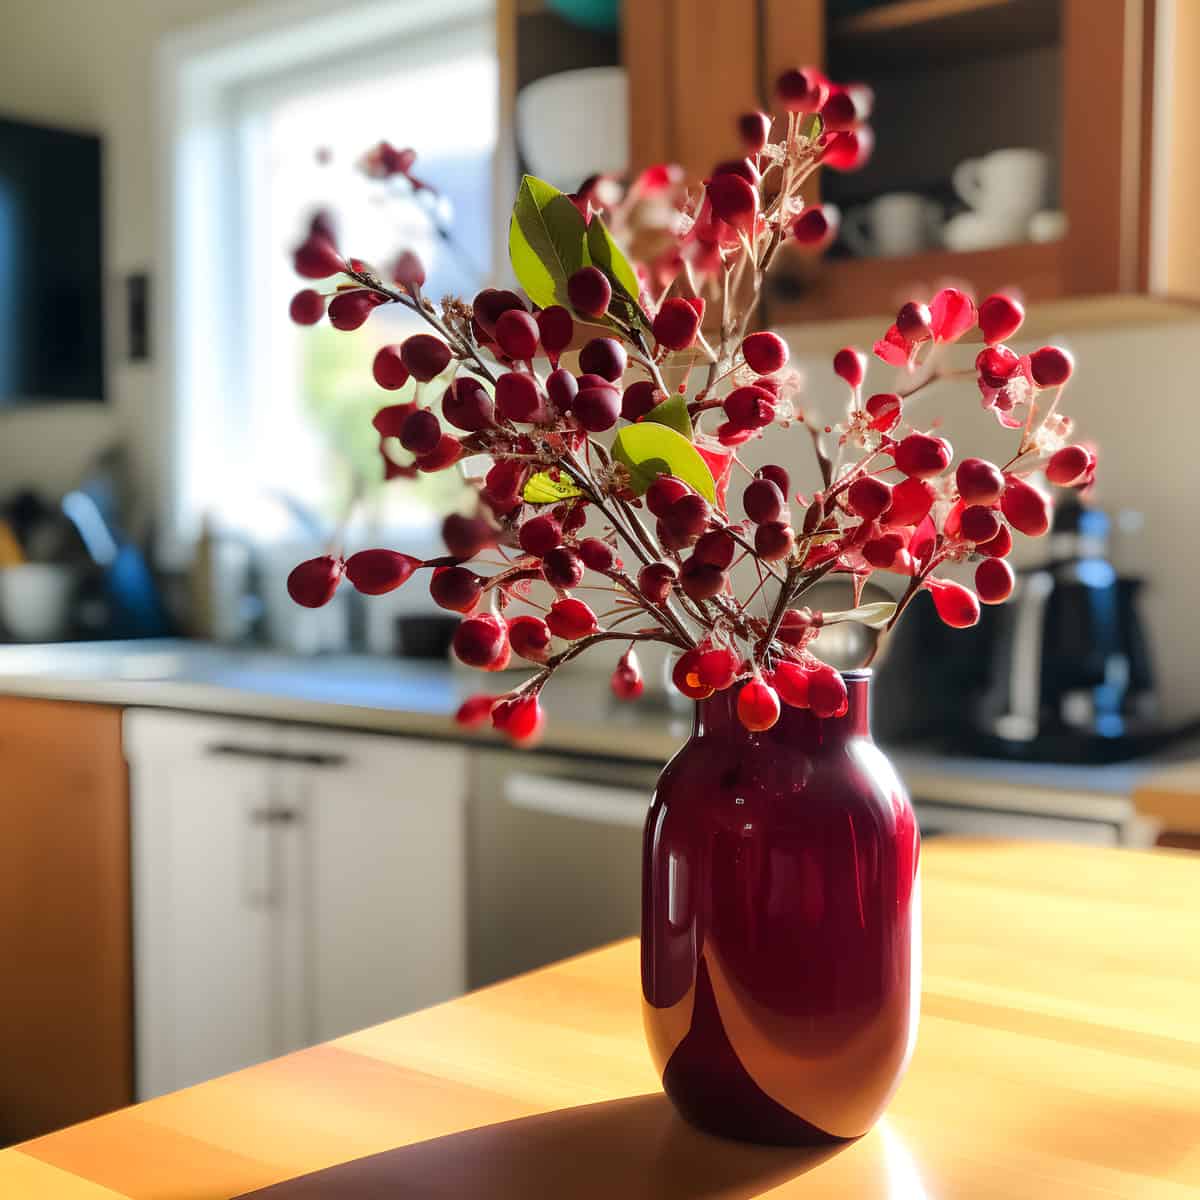 Chinese Serviceberry on a kitchen counter